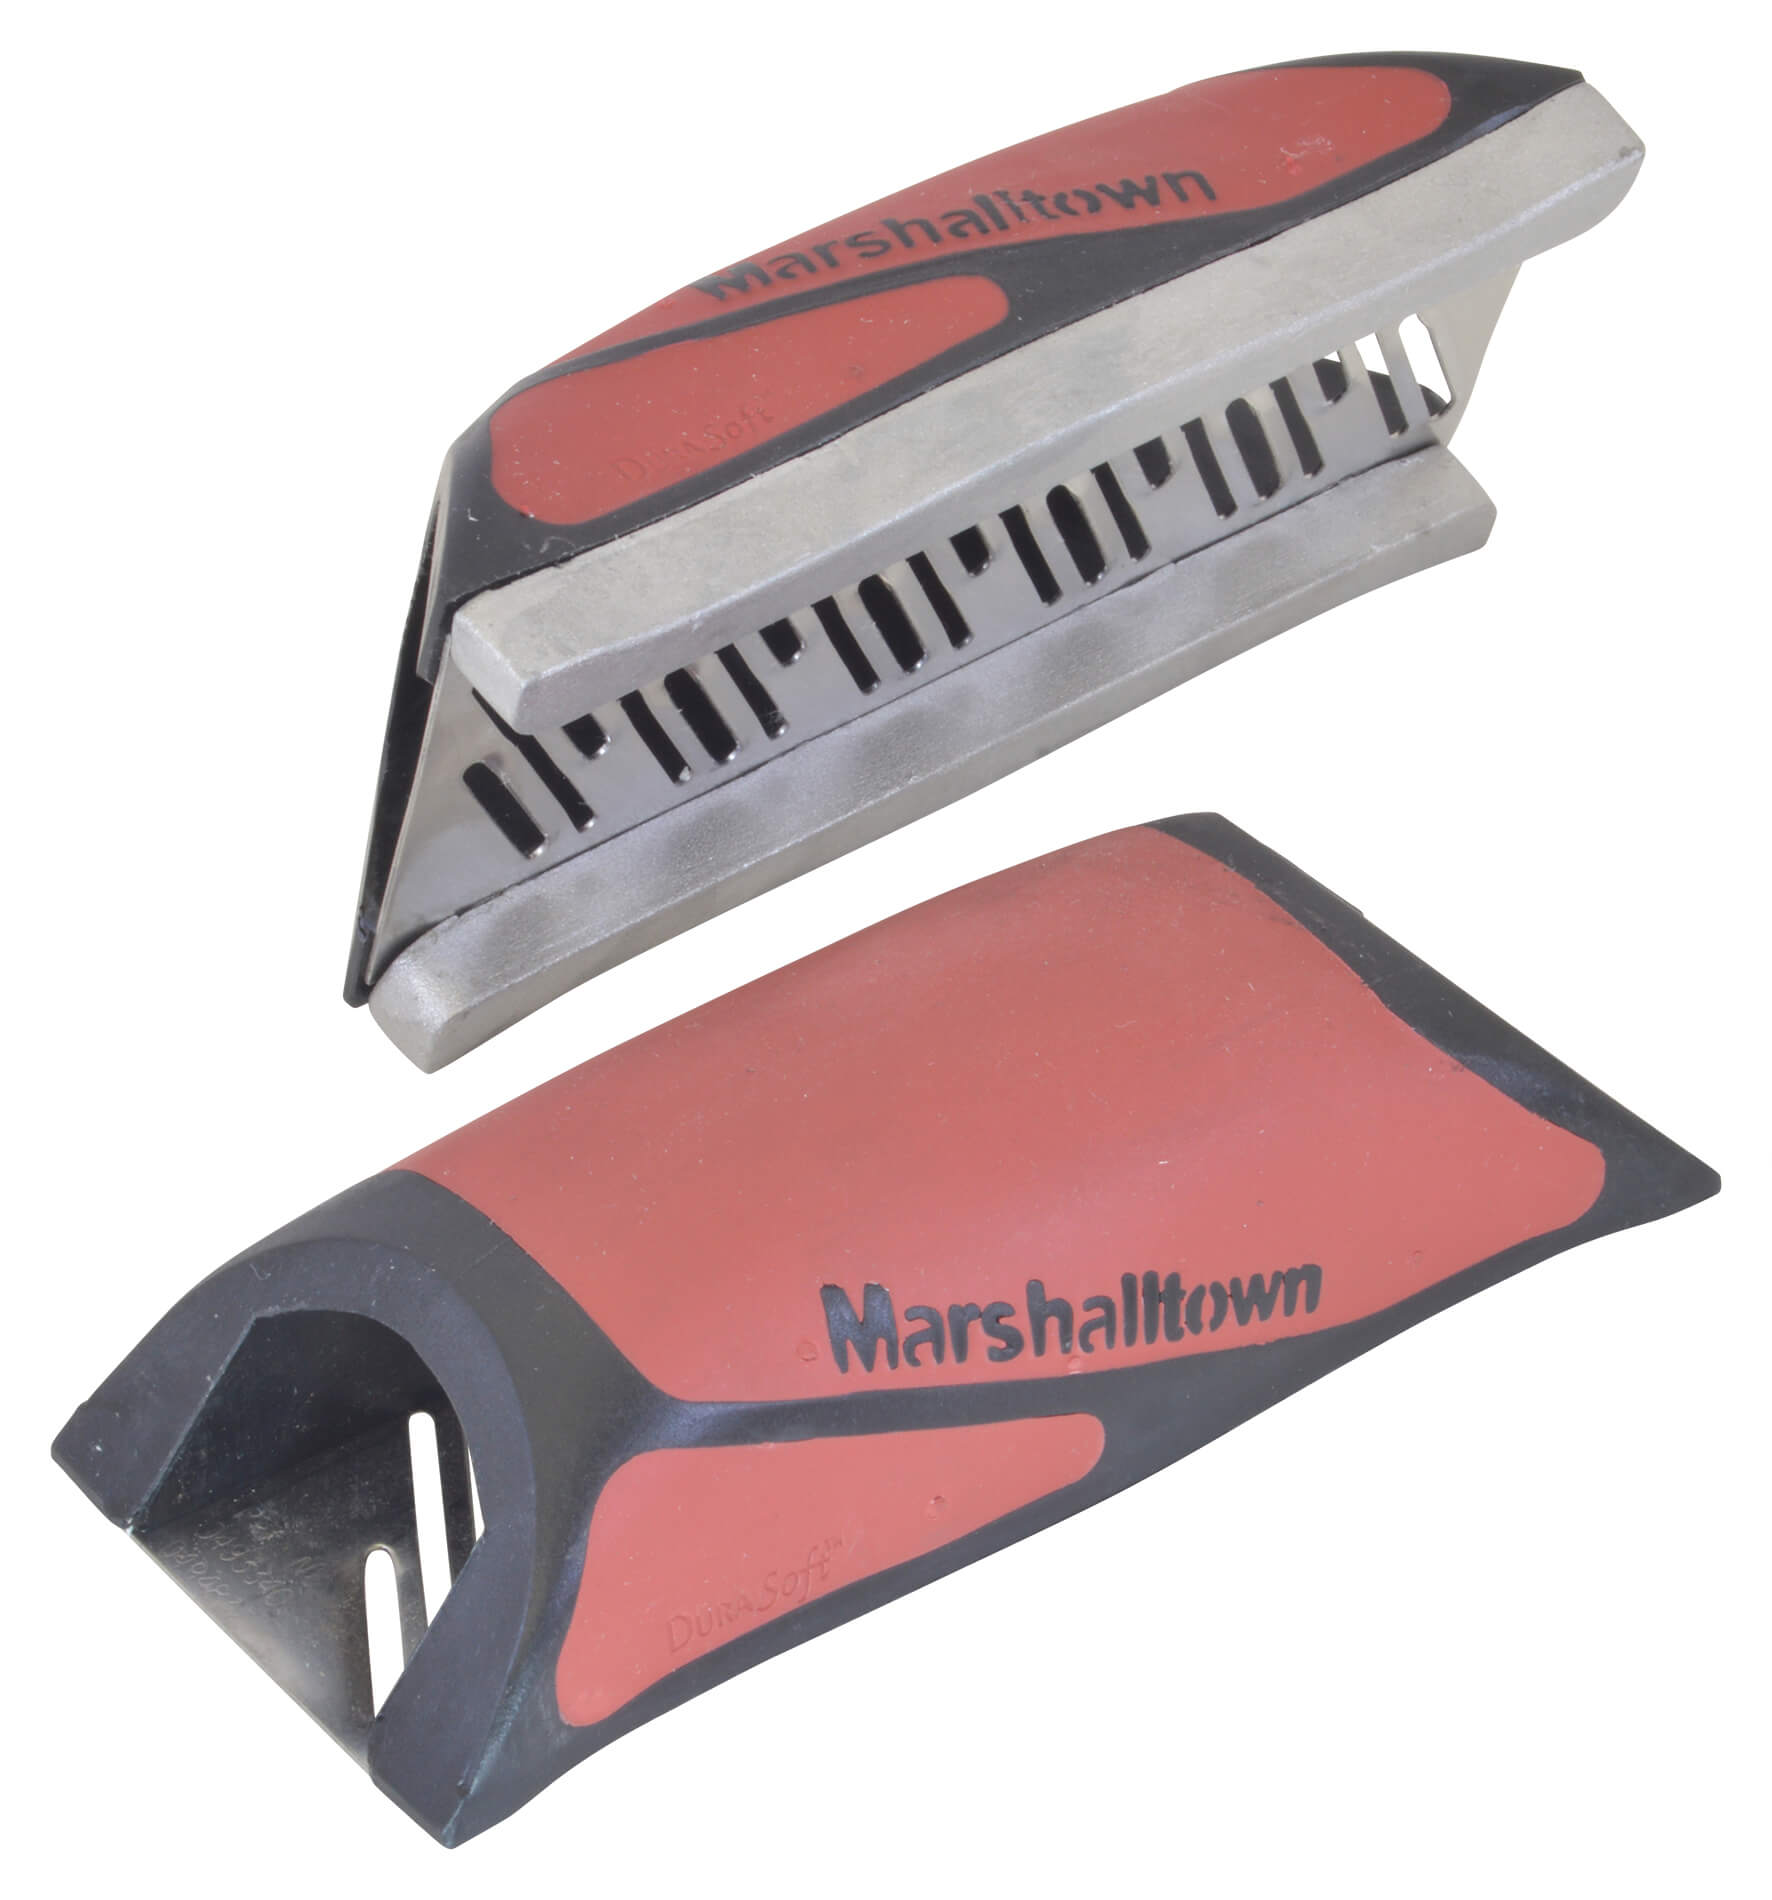 Marshalltown DR390 Drywall Rasp without Guide Rail